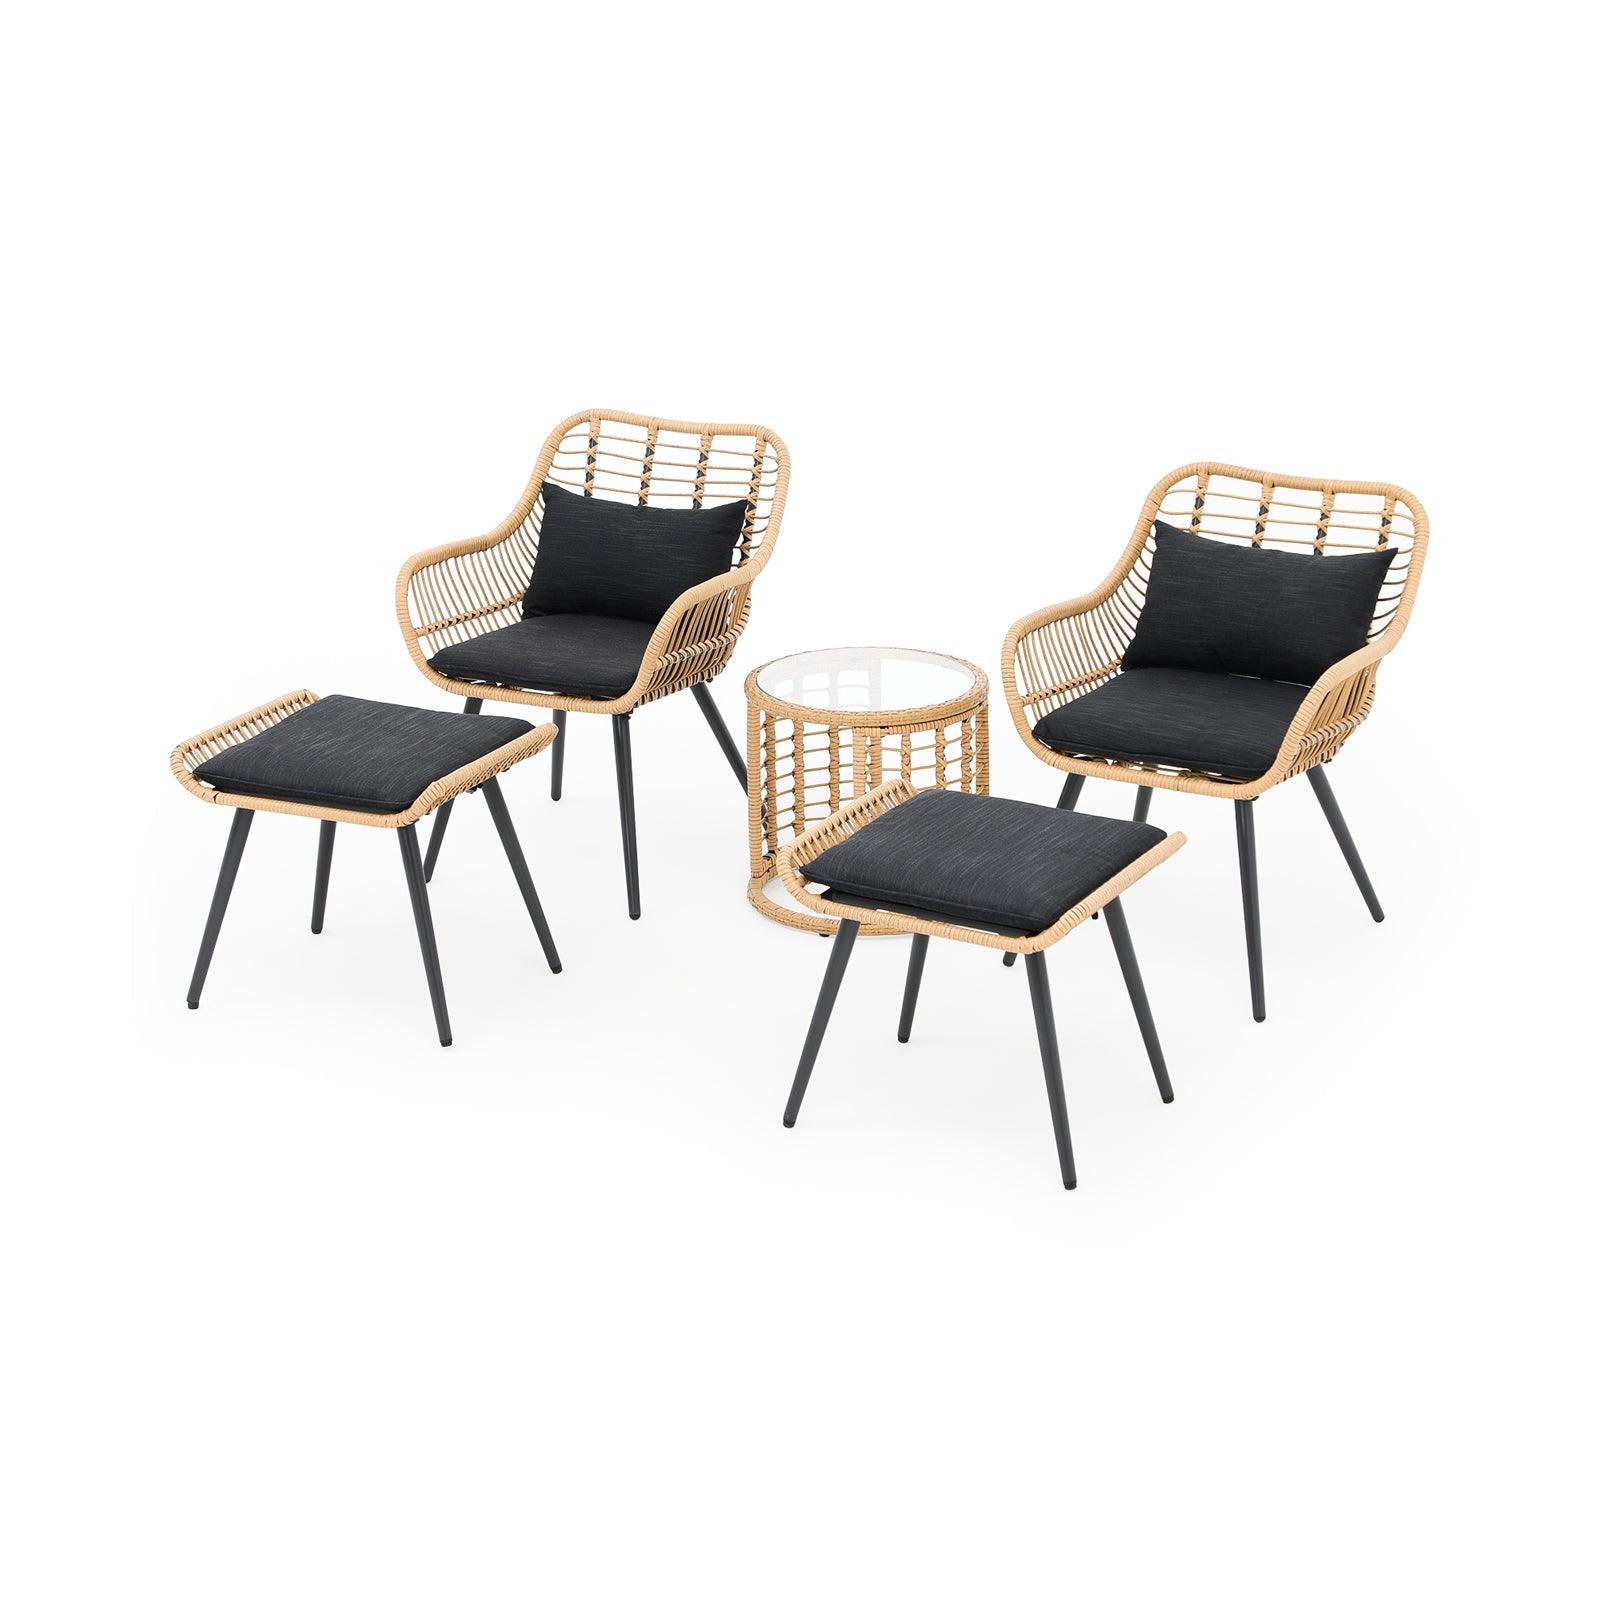 Oia Modern Wicker Outdoor Furniture, 5 Piece Natural Patio Bistro Set with black cushions, two bistro chairs with ottomans, one round bistro table,  side view- Jardina Furniture#Color_Black